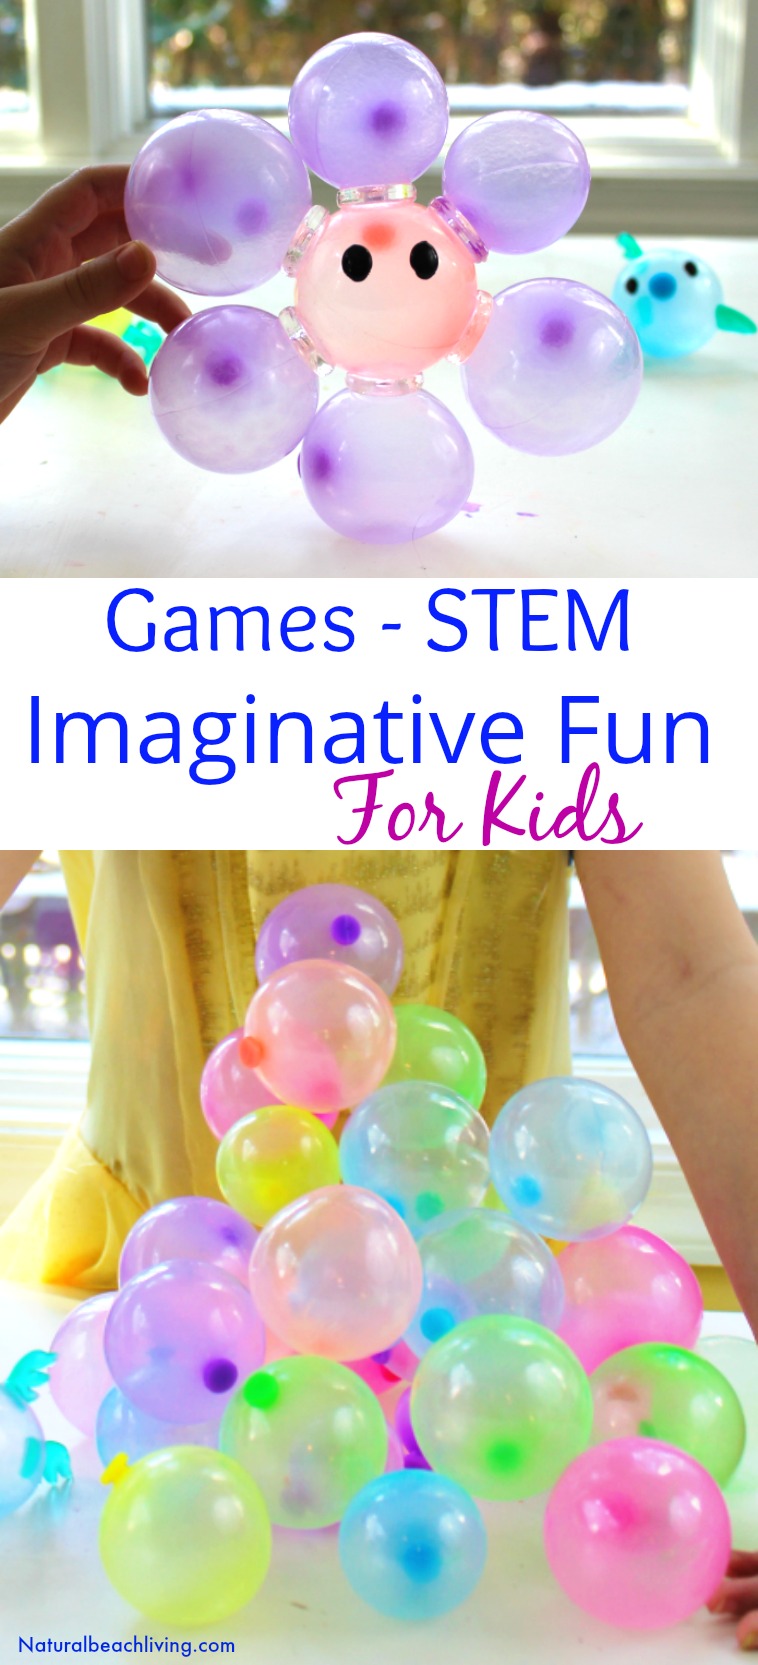 Easy Games, STEM, Imaginative Fun, Ornaments & More with Oonies